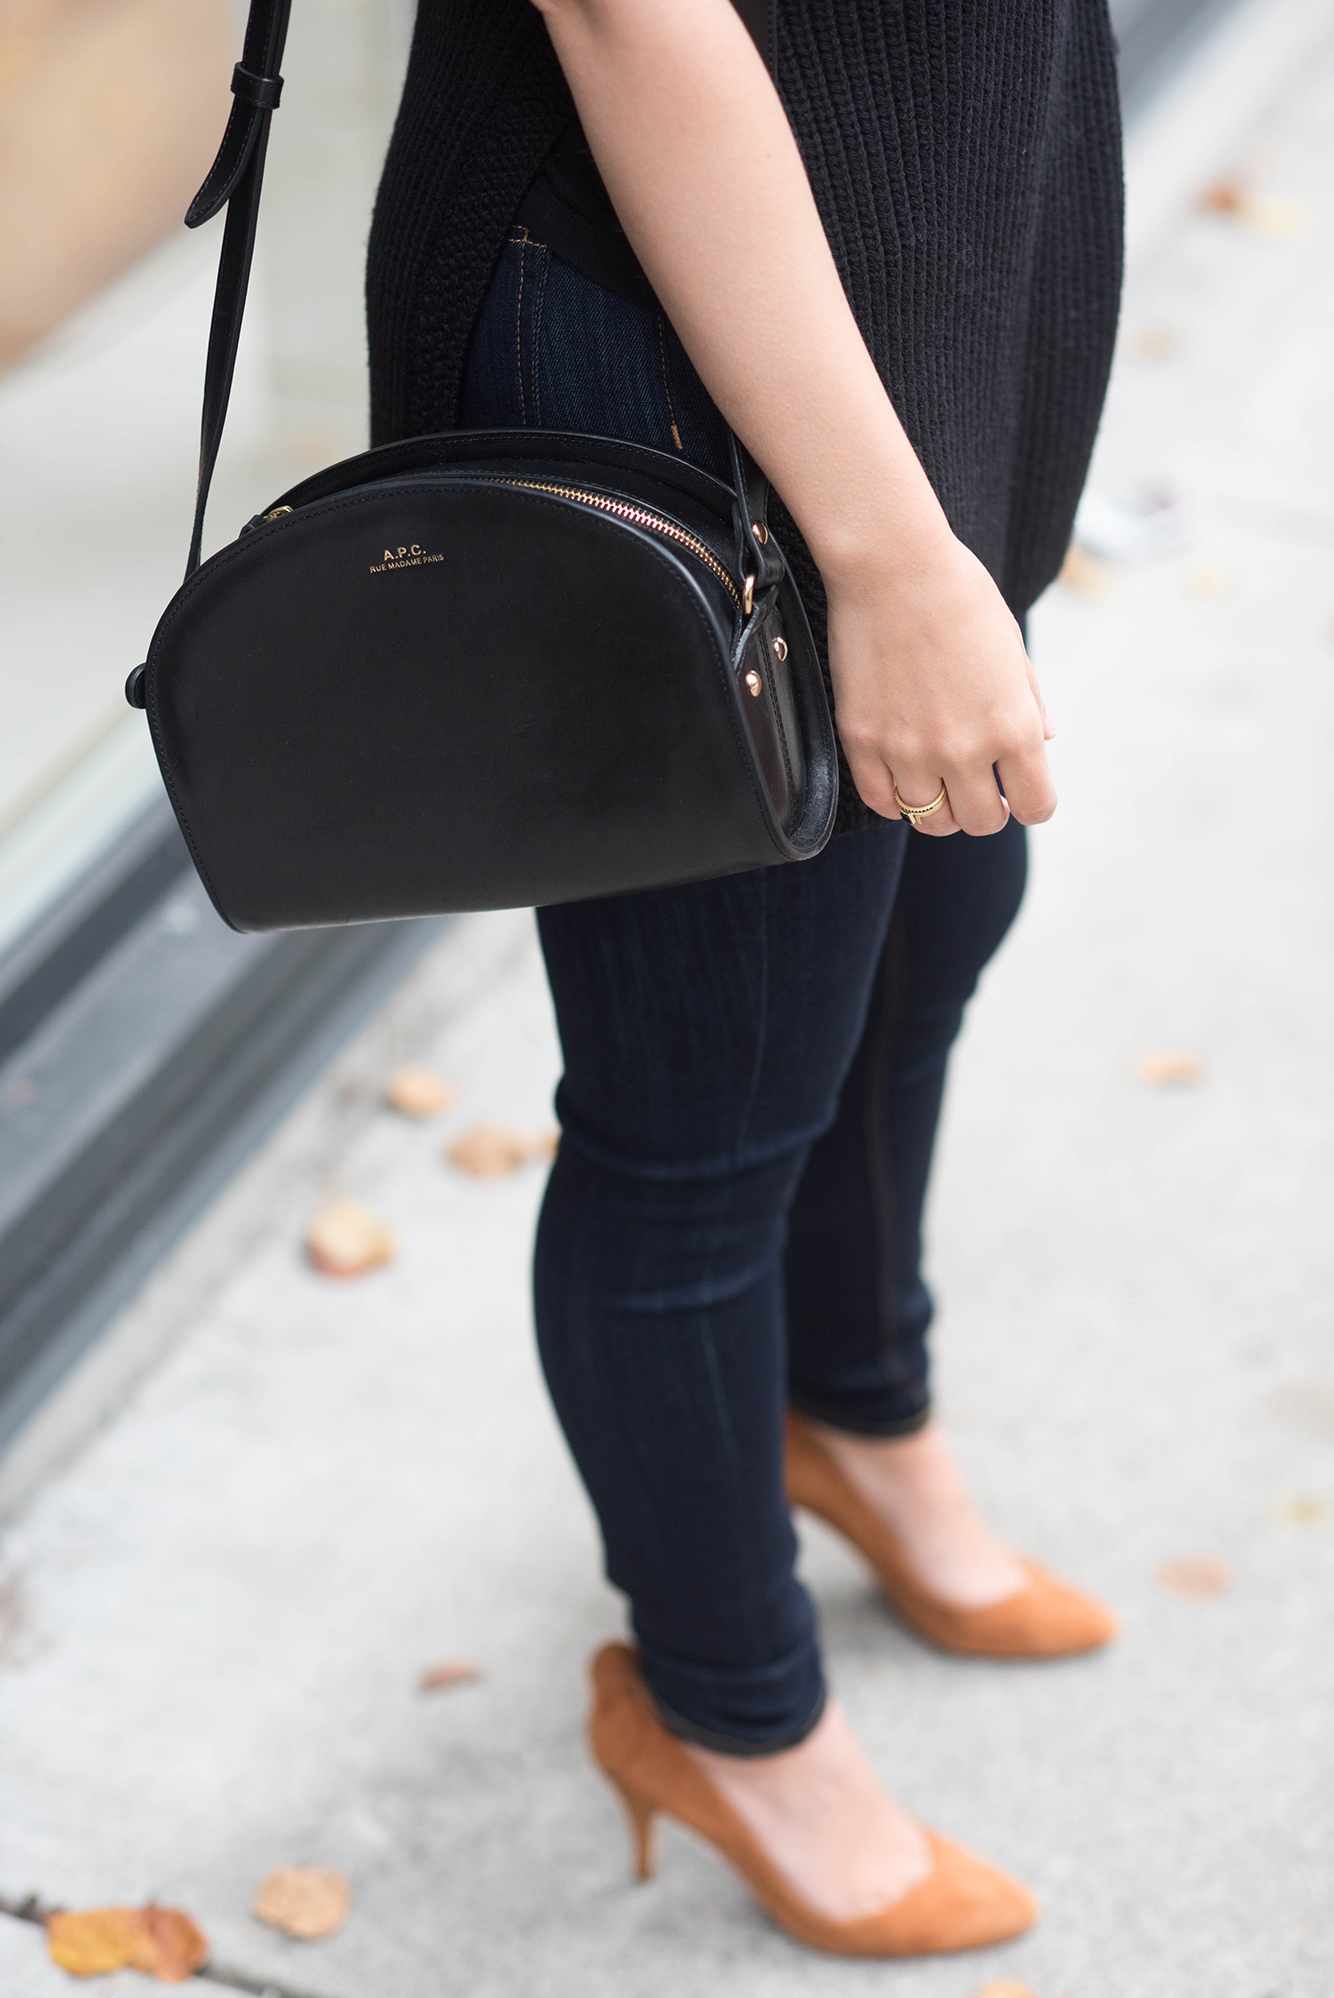 coco-and-vera-best-vancouver-style-blog-best-canadian-style-blog-top-blogger-outfit-details-grlfrnd-jeans-sezane-suede-pumps-apc-halfmoon-bag-madewell-rings